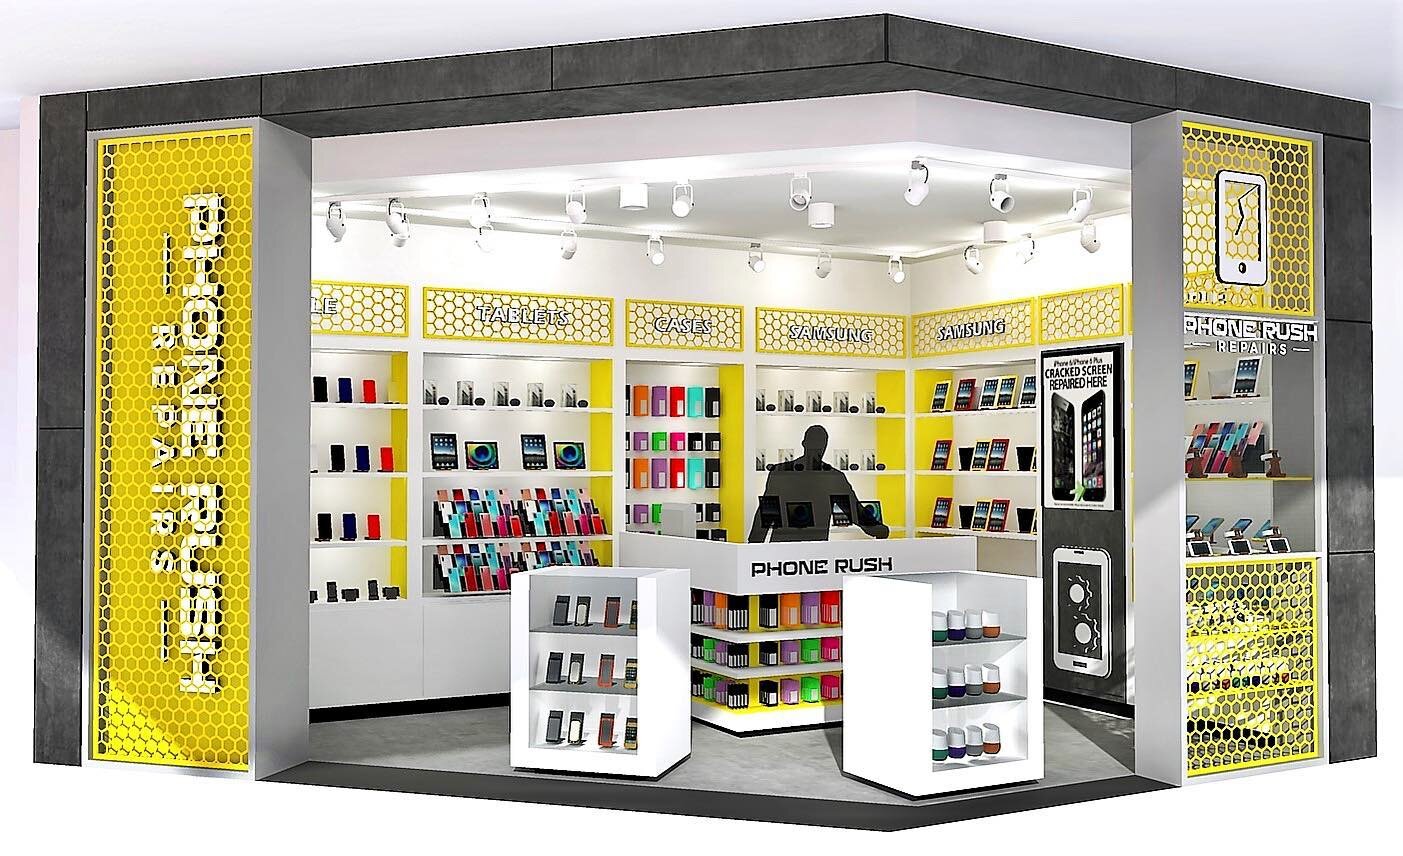 Coming soon, Phone Rush Repairs - Colonnades - Well done Simran we look forward to seeing this progress in the next few weeks ! @new_edge_retail_design_adel #retailarchitectureanddesign #phone #phoneaccessories #yellow #phonecases #phoneshop